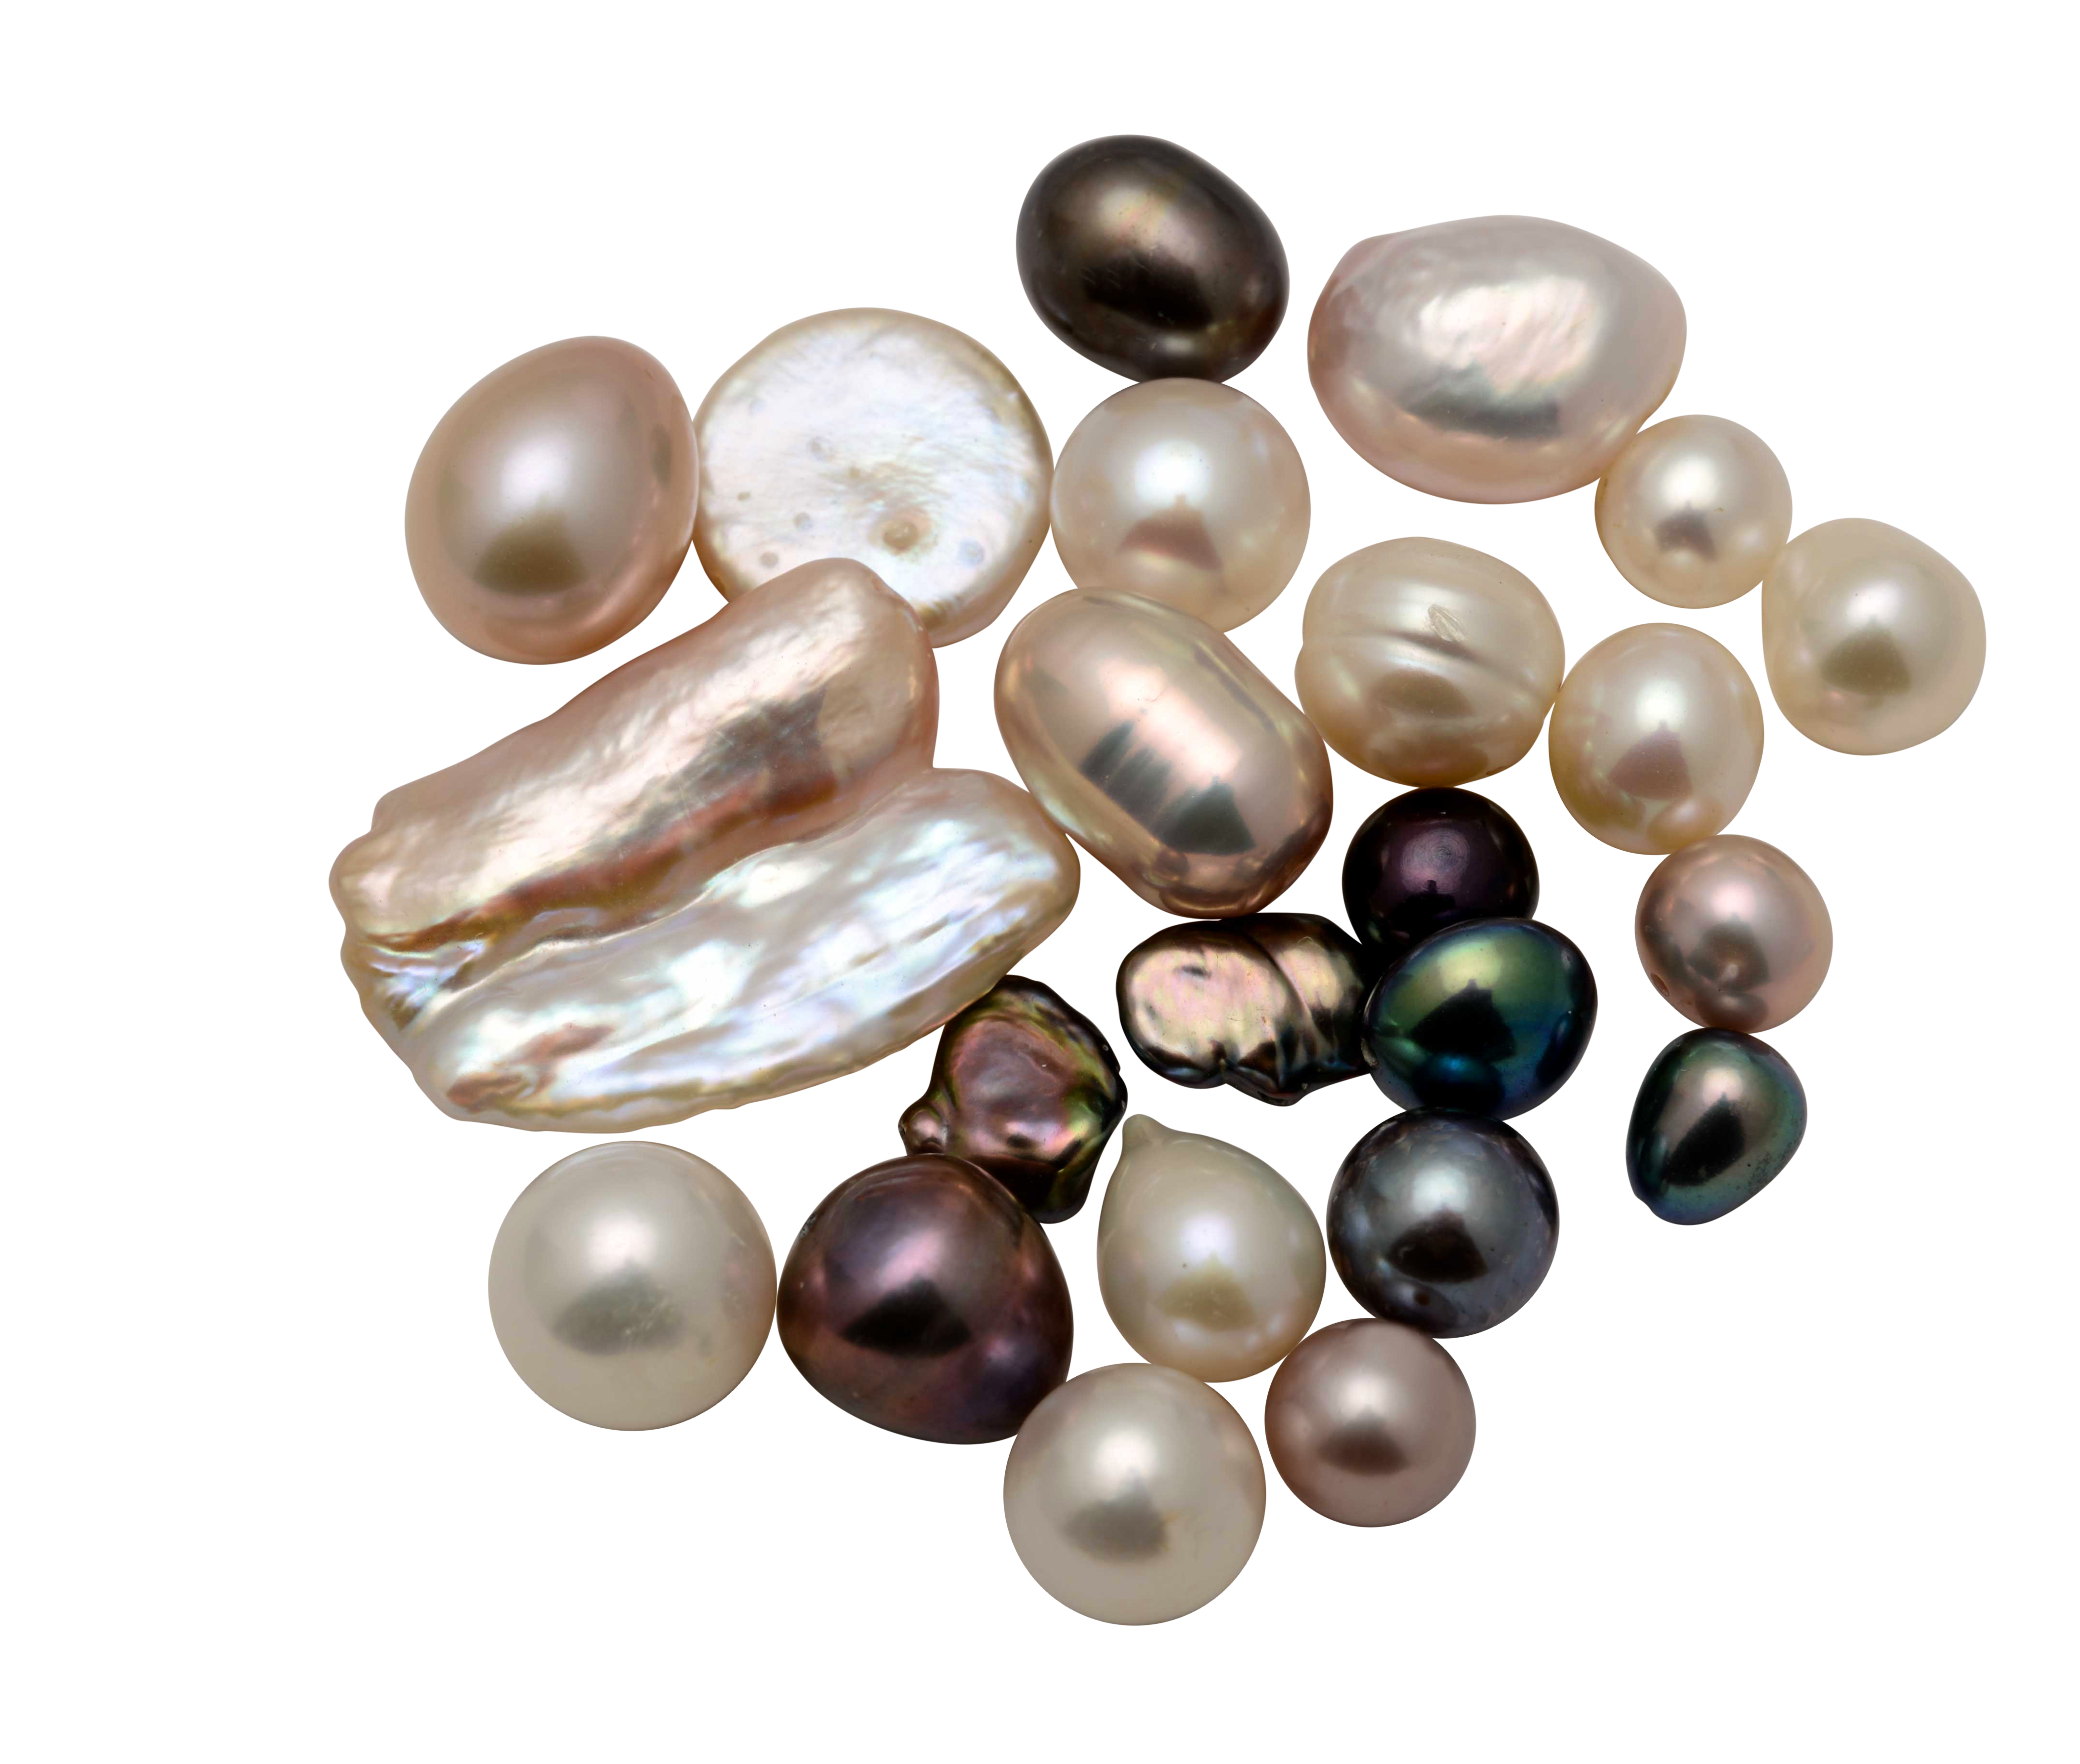 Loose Freshwater Pearls of different shapes